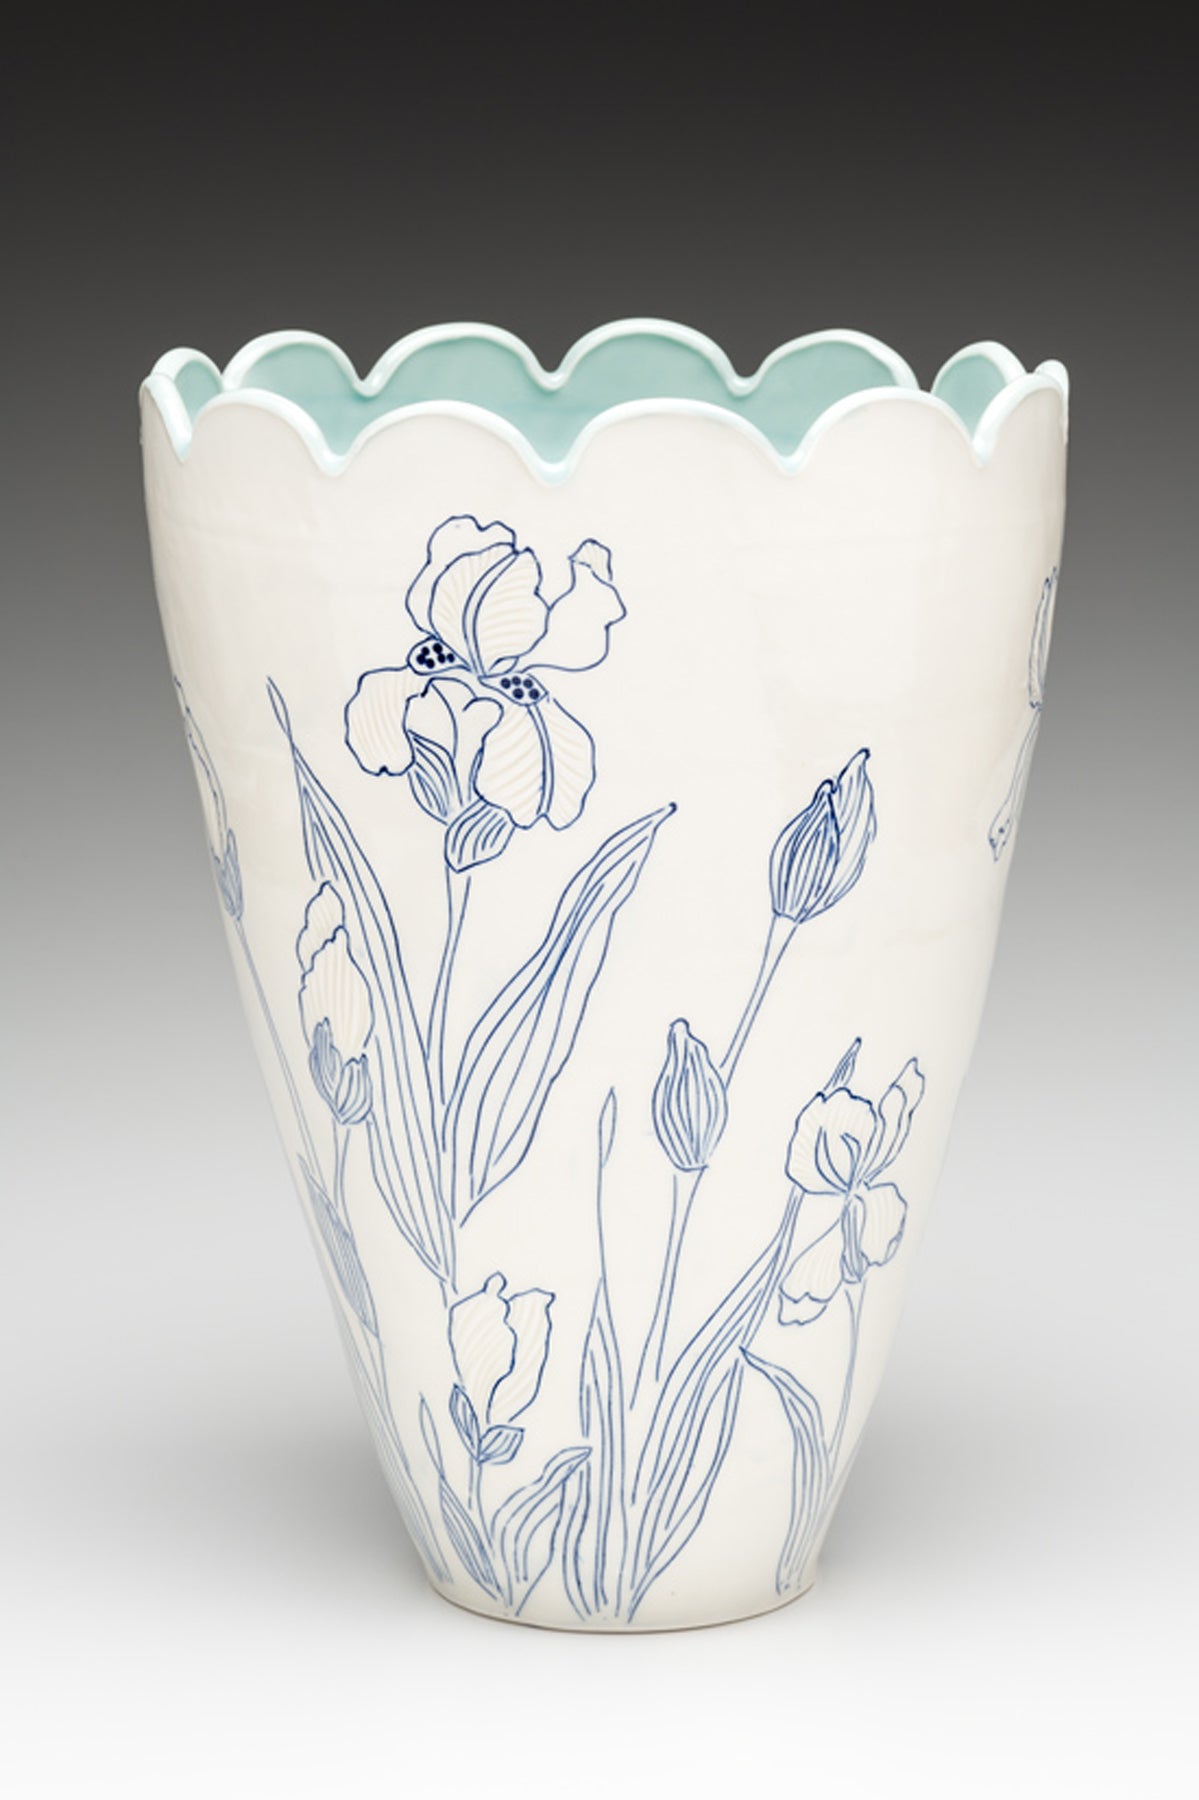 A white handmade porcelain vase with blue inlay by ceramic artist Julie Wiggins sits against a gradient background. 